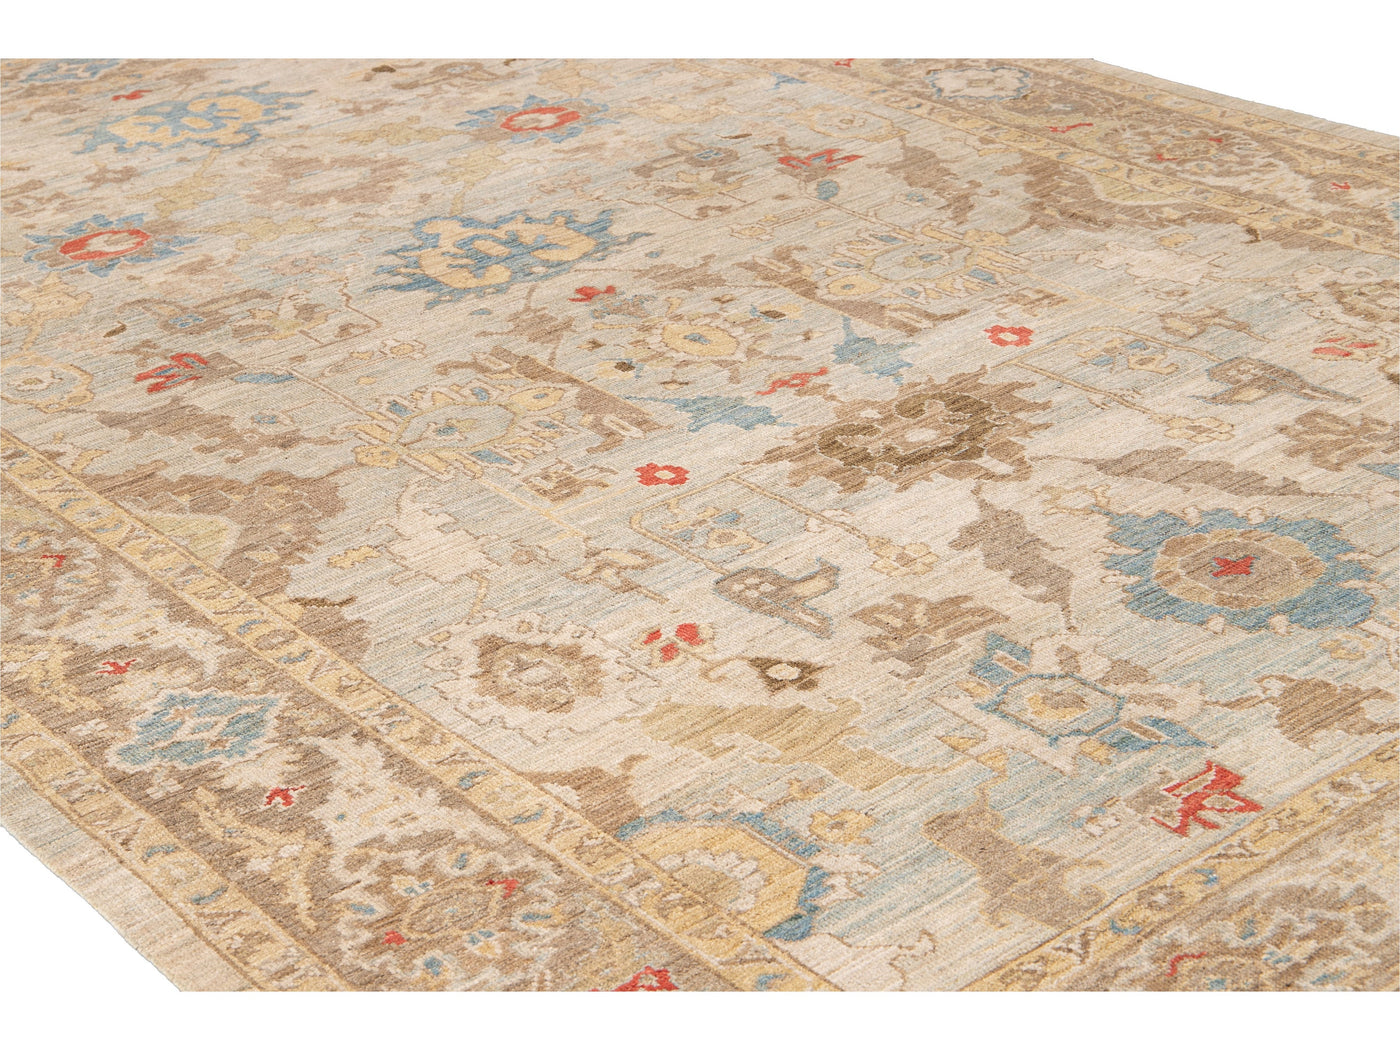 Modern Sultanabad Handmade Floral Blue and Brown Wool Rug